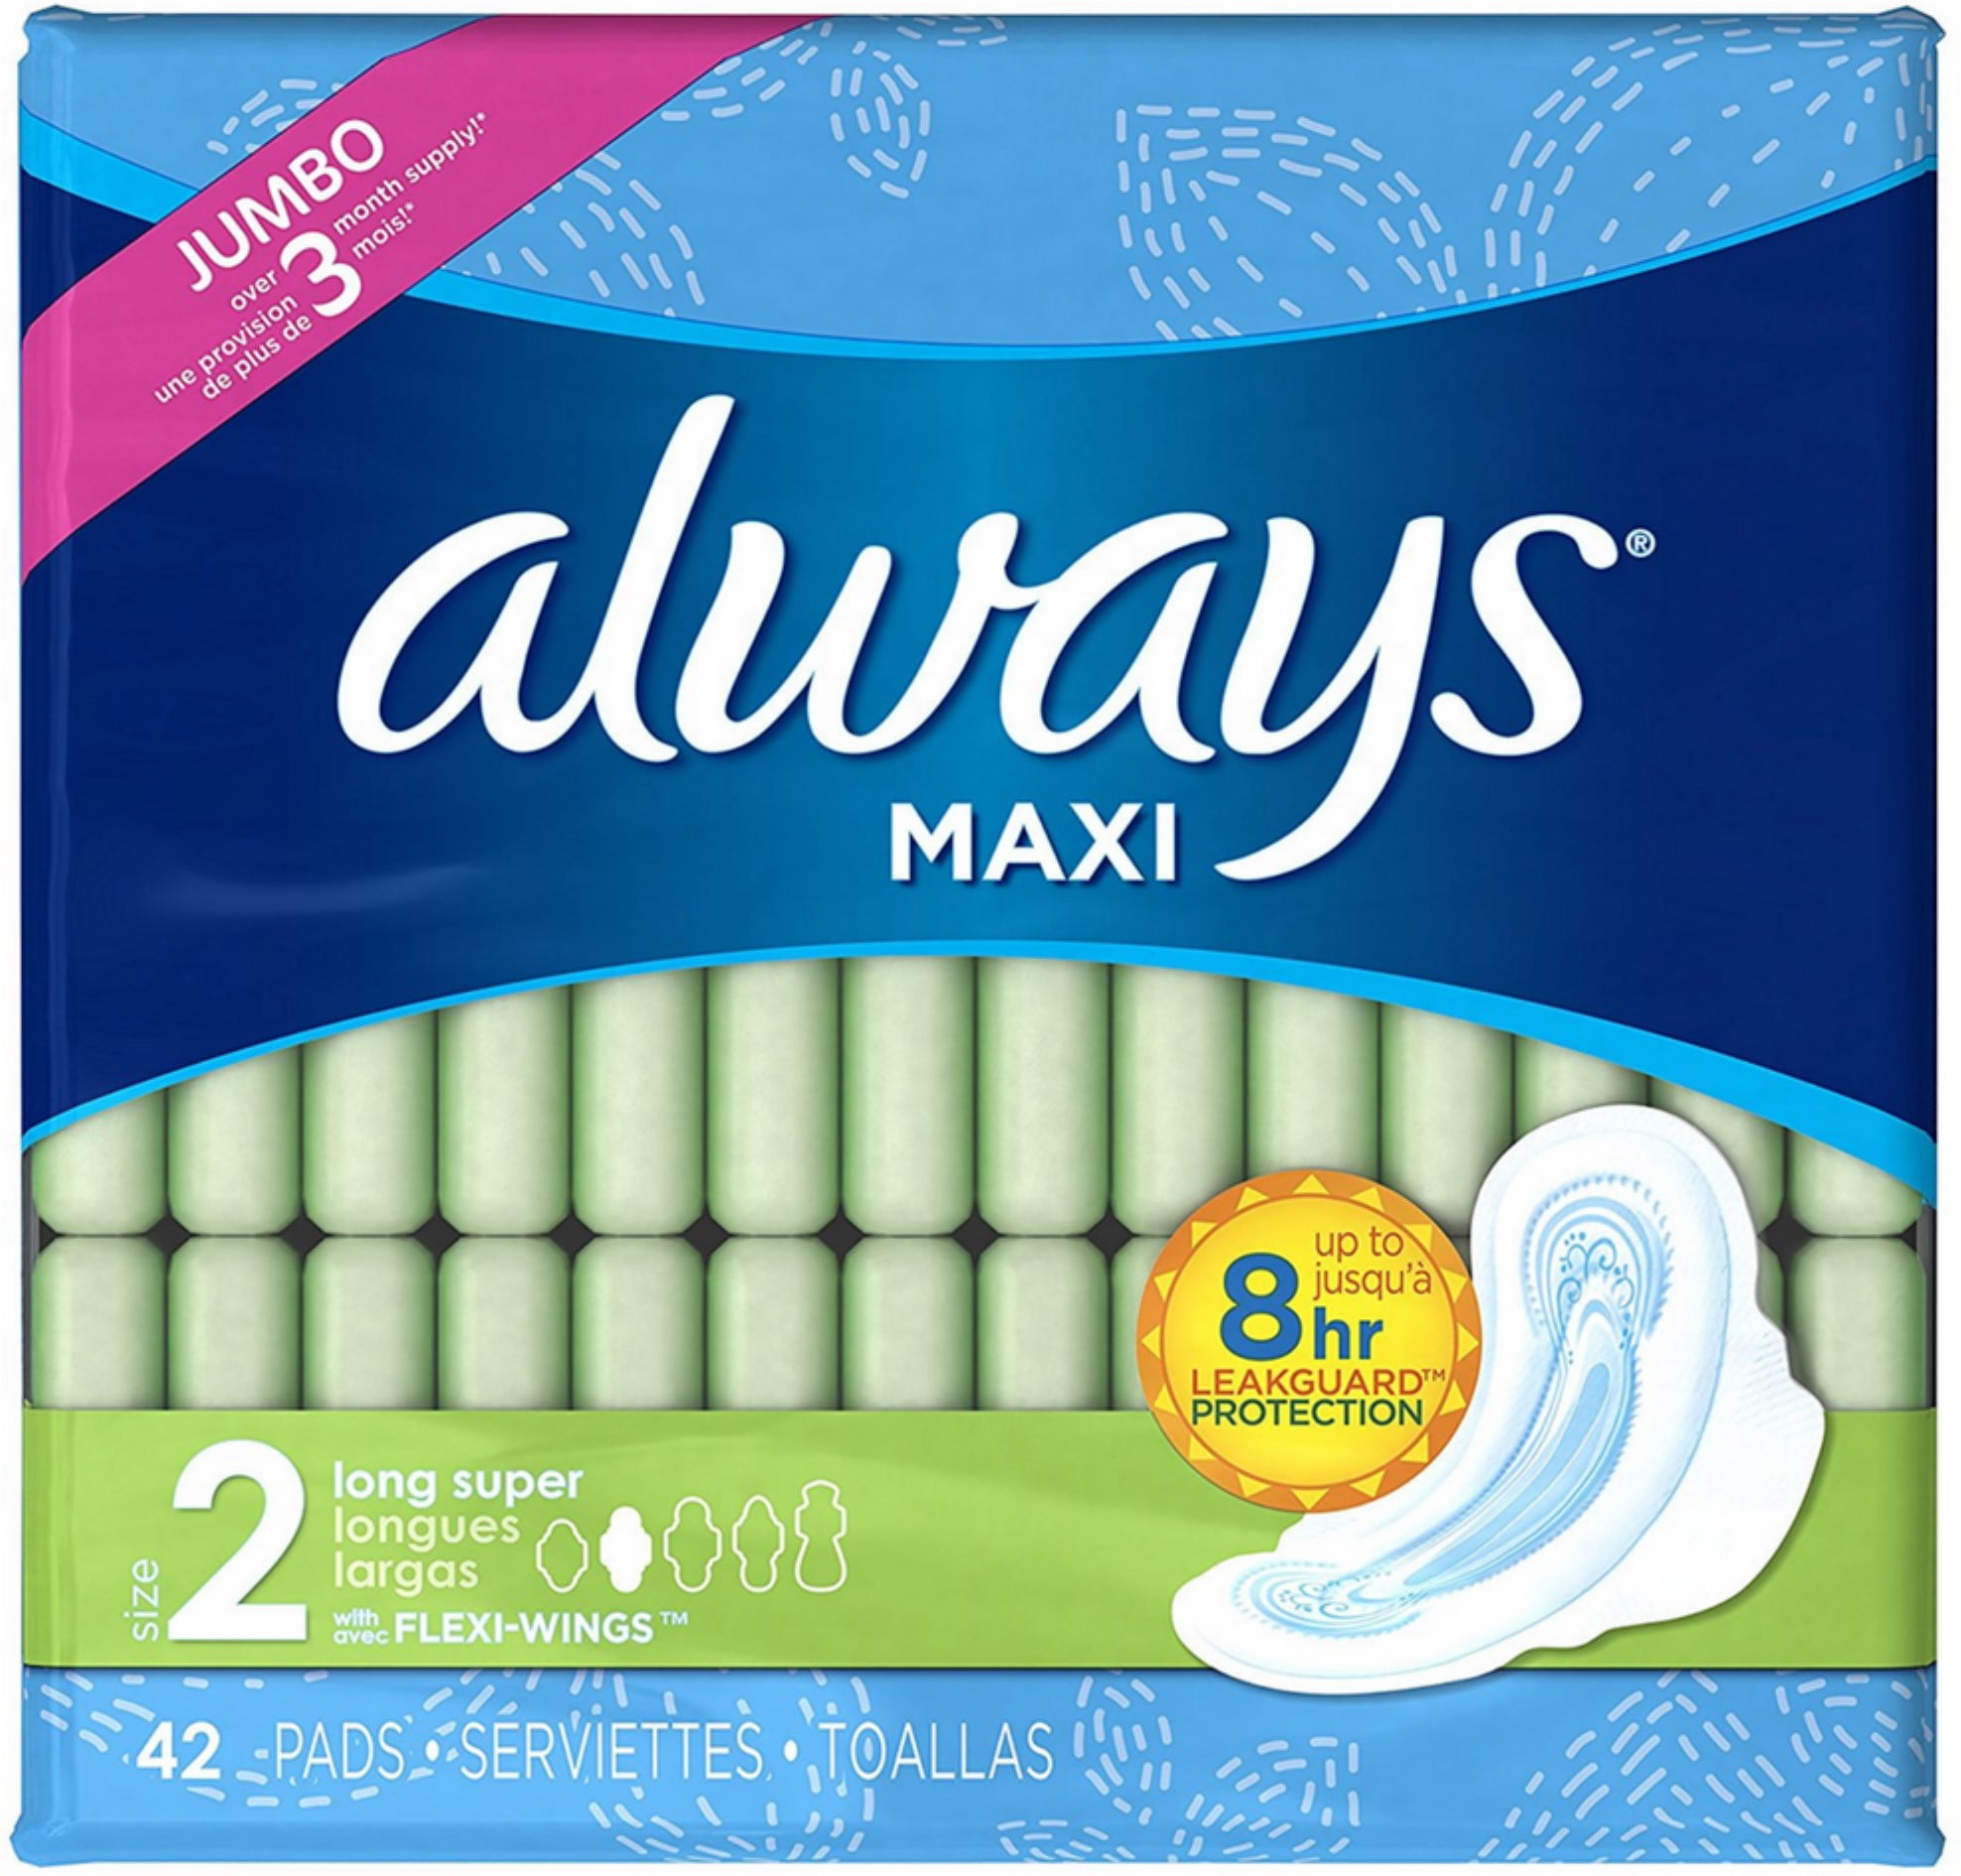 Always Maxi Over Night Pads With Wings Size 4, Unscented, 16 Ea